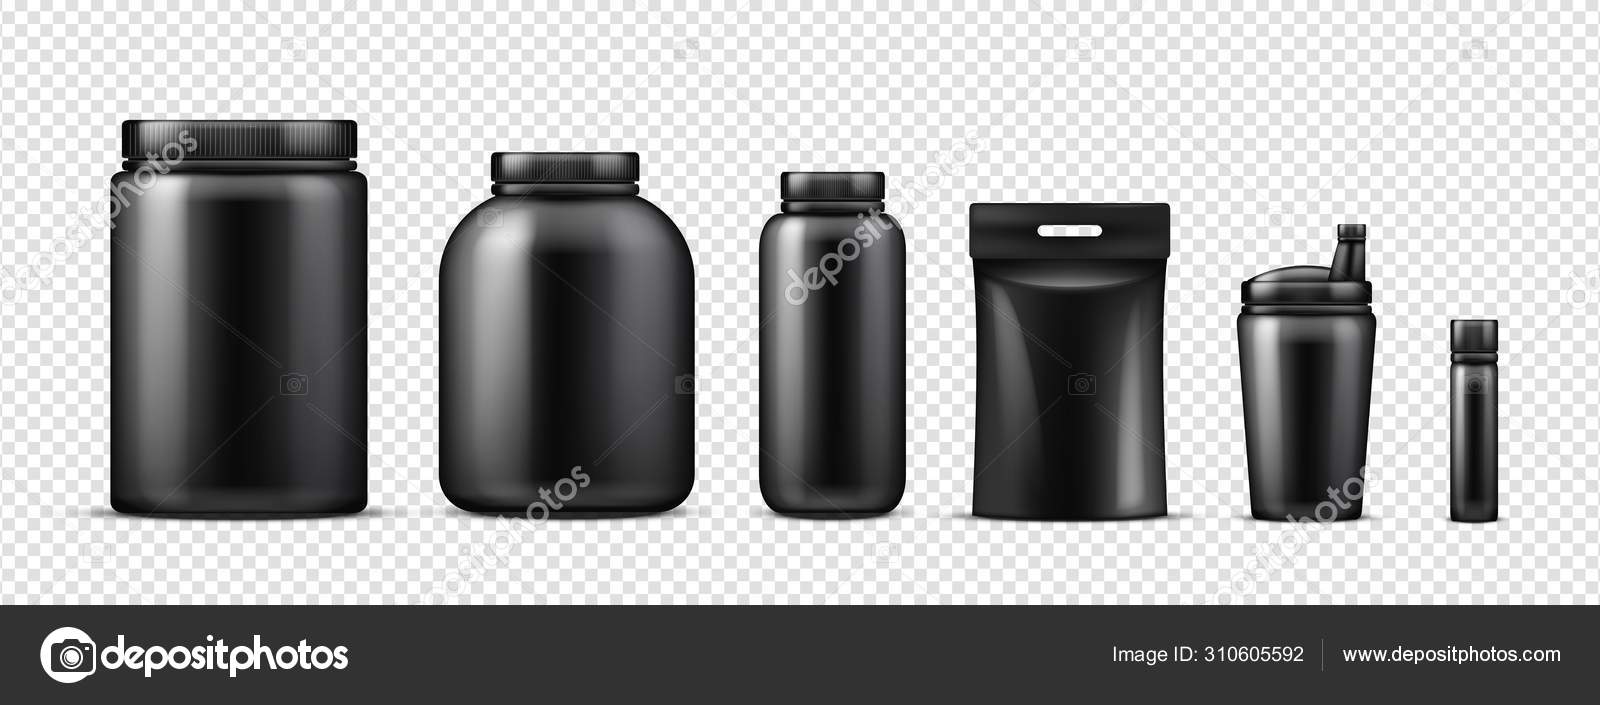 Download Black Protein Bottles Mockup Vector Realistic Sport Nutrition Containers Isolated On Transparent Background Vector Image By C Microone Vector Stock 310605592